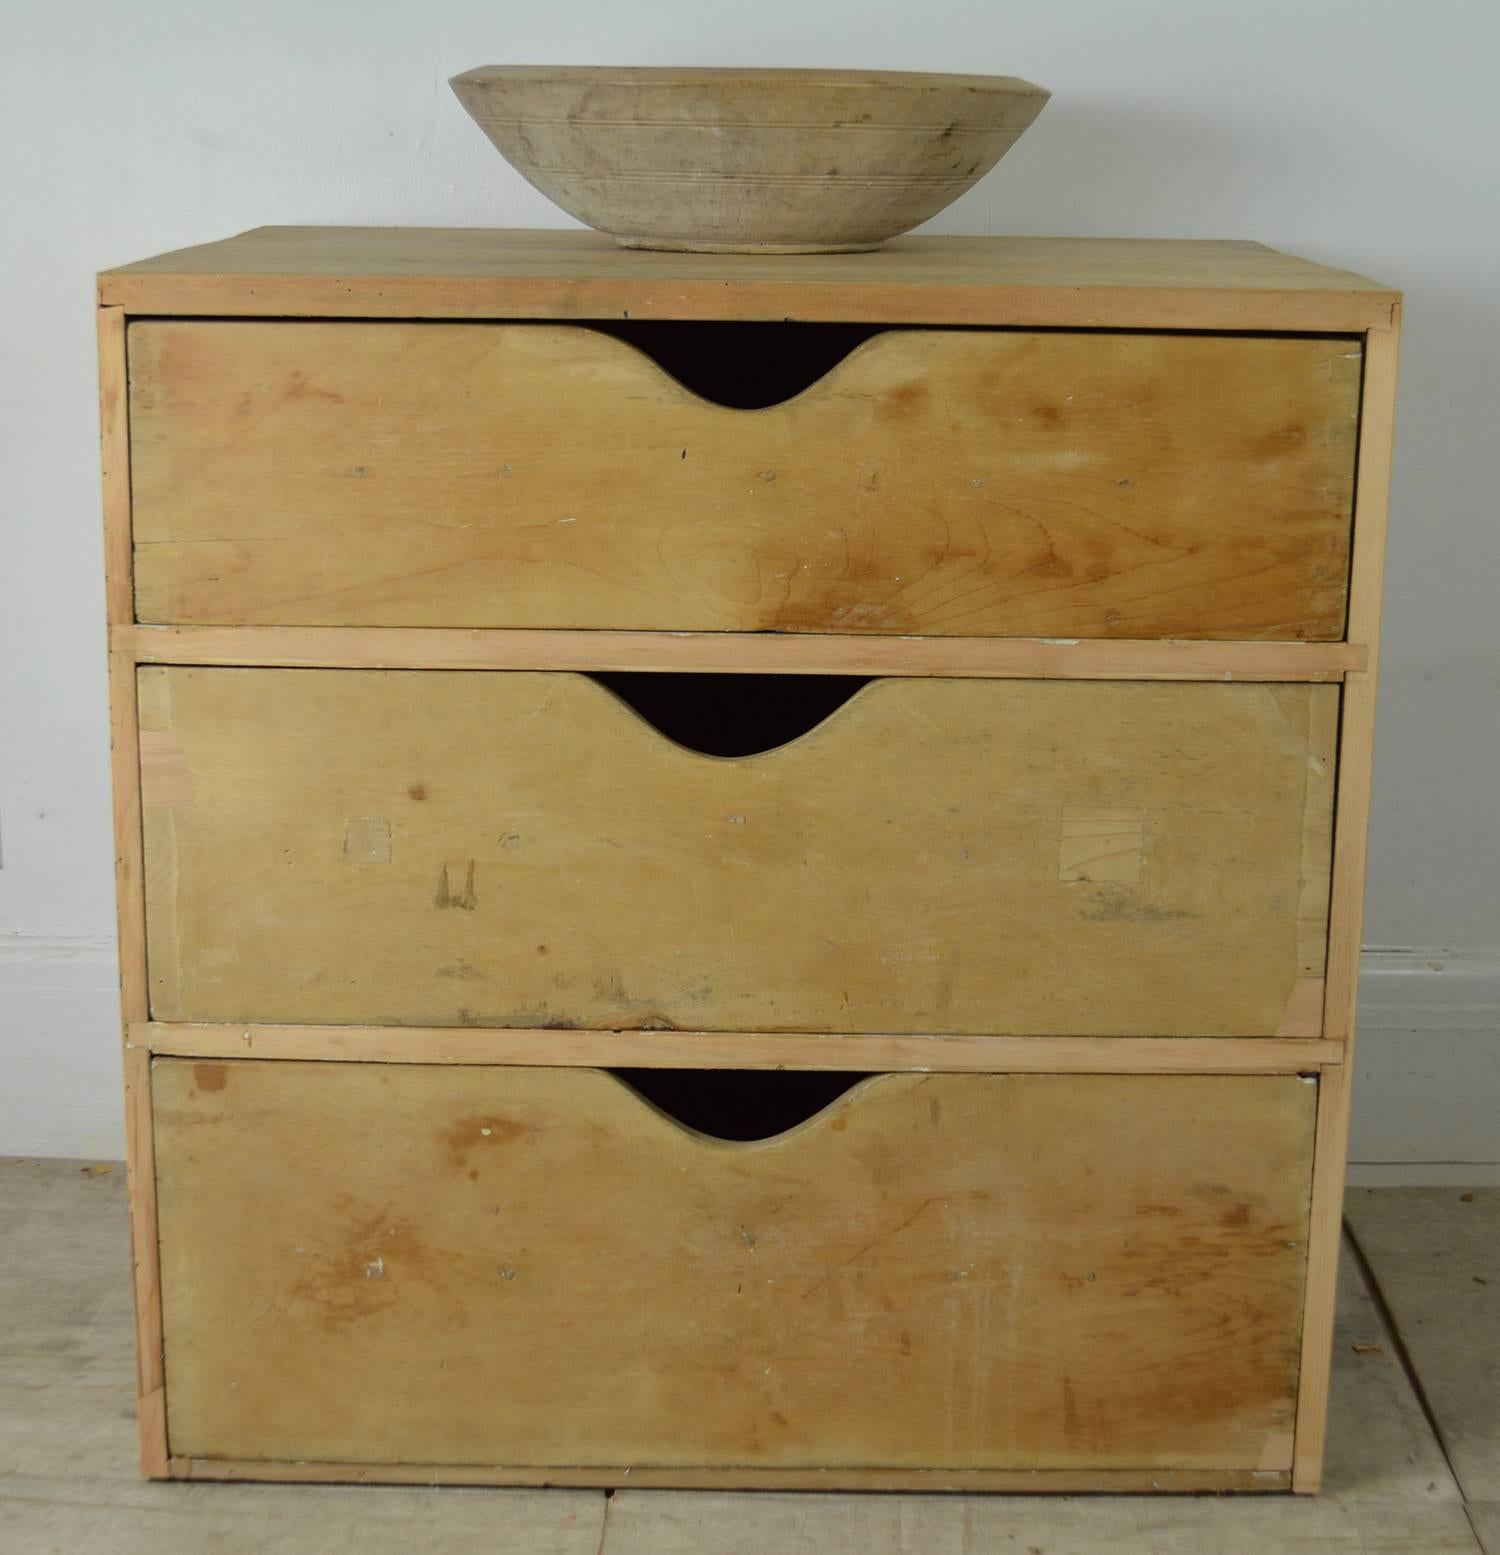 Antique Minimalist Style Pine Chest of Drawers, English, 19th Century 1